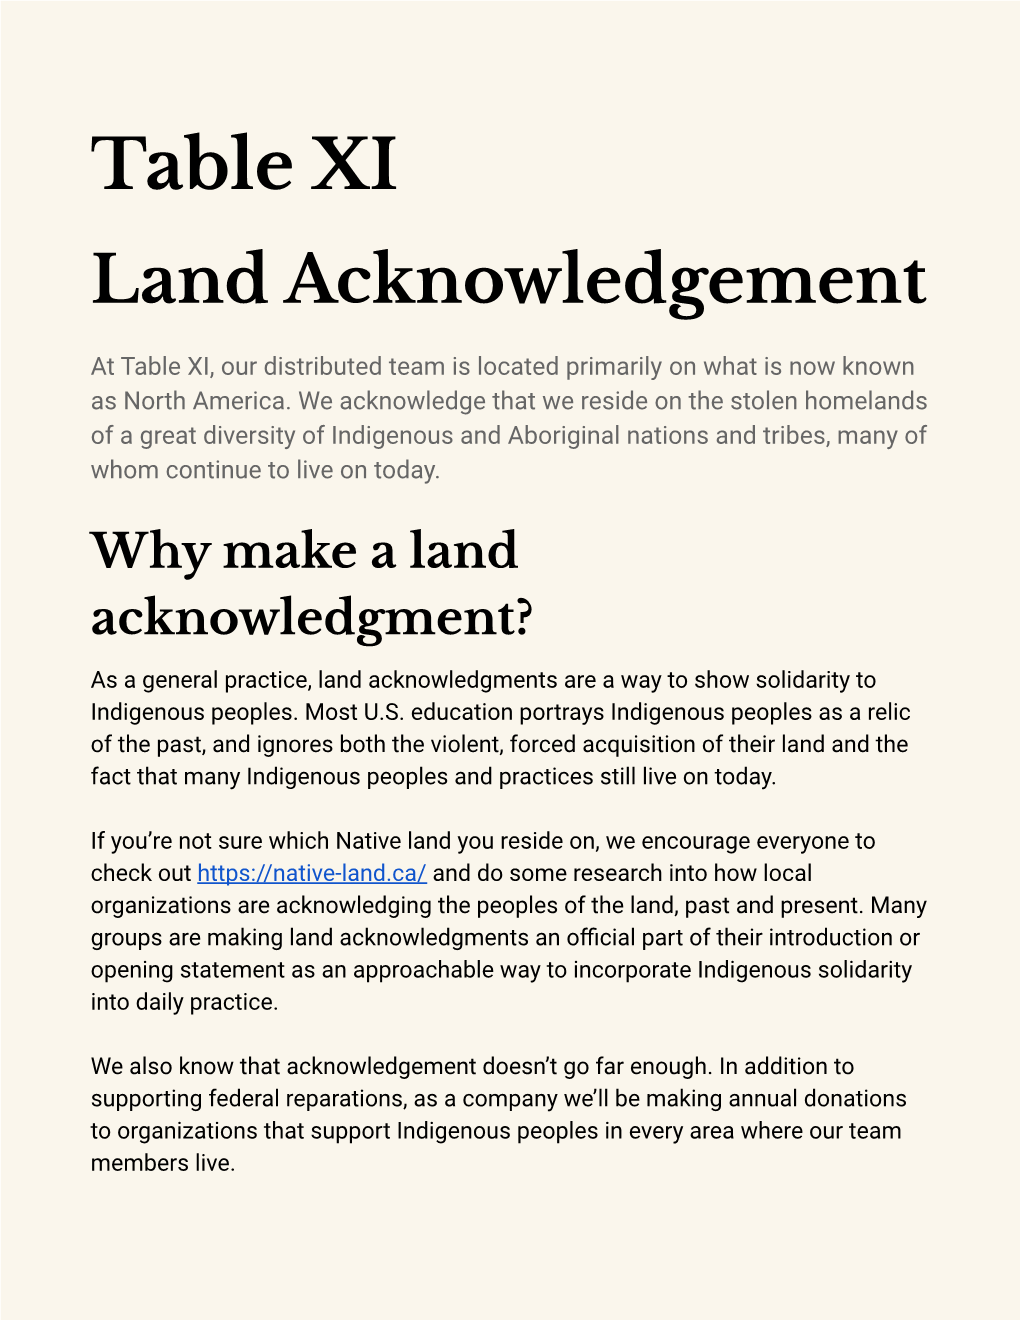 Land Acknowledgment? As a General Practice, Land Acknowledgments Are a Way to Show Solidarity to Indigenous Peoples